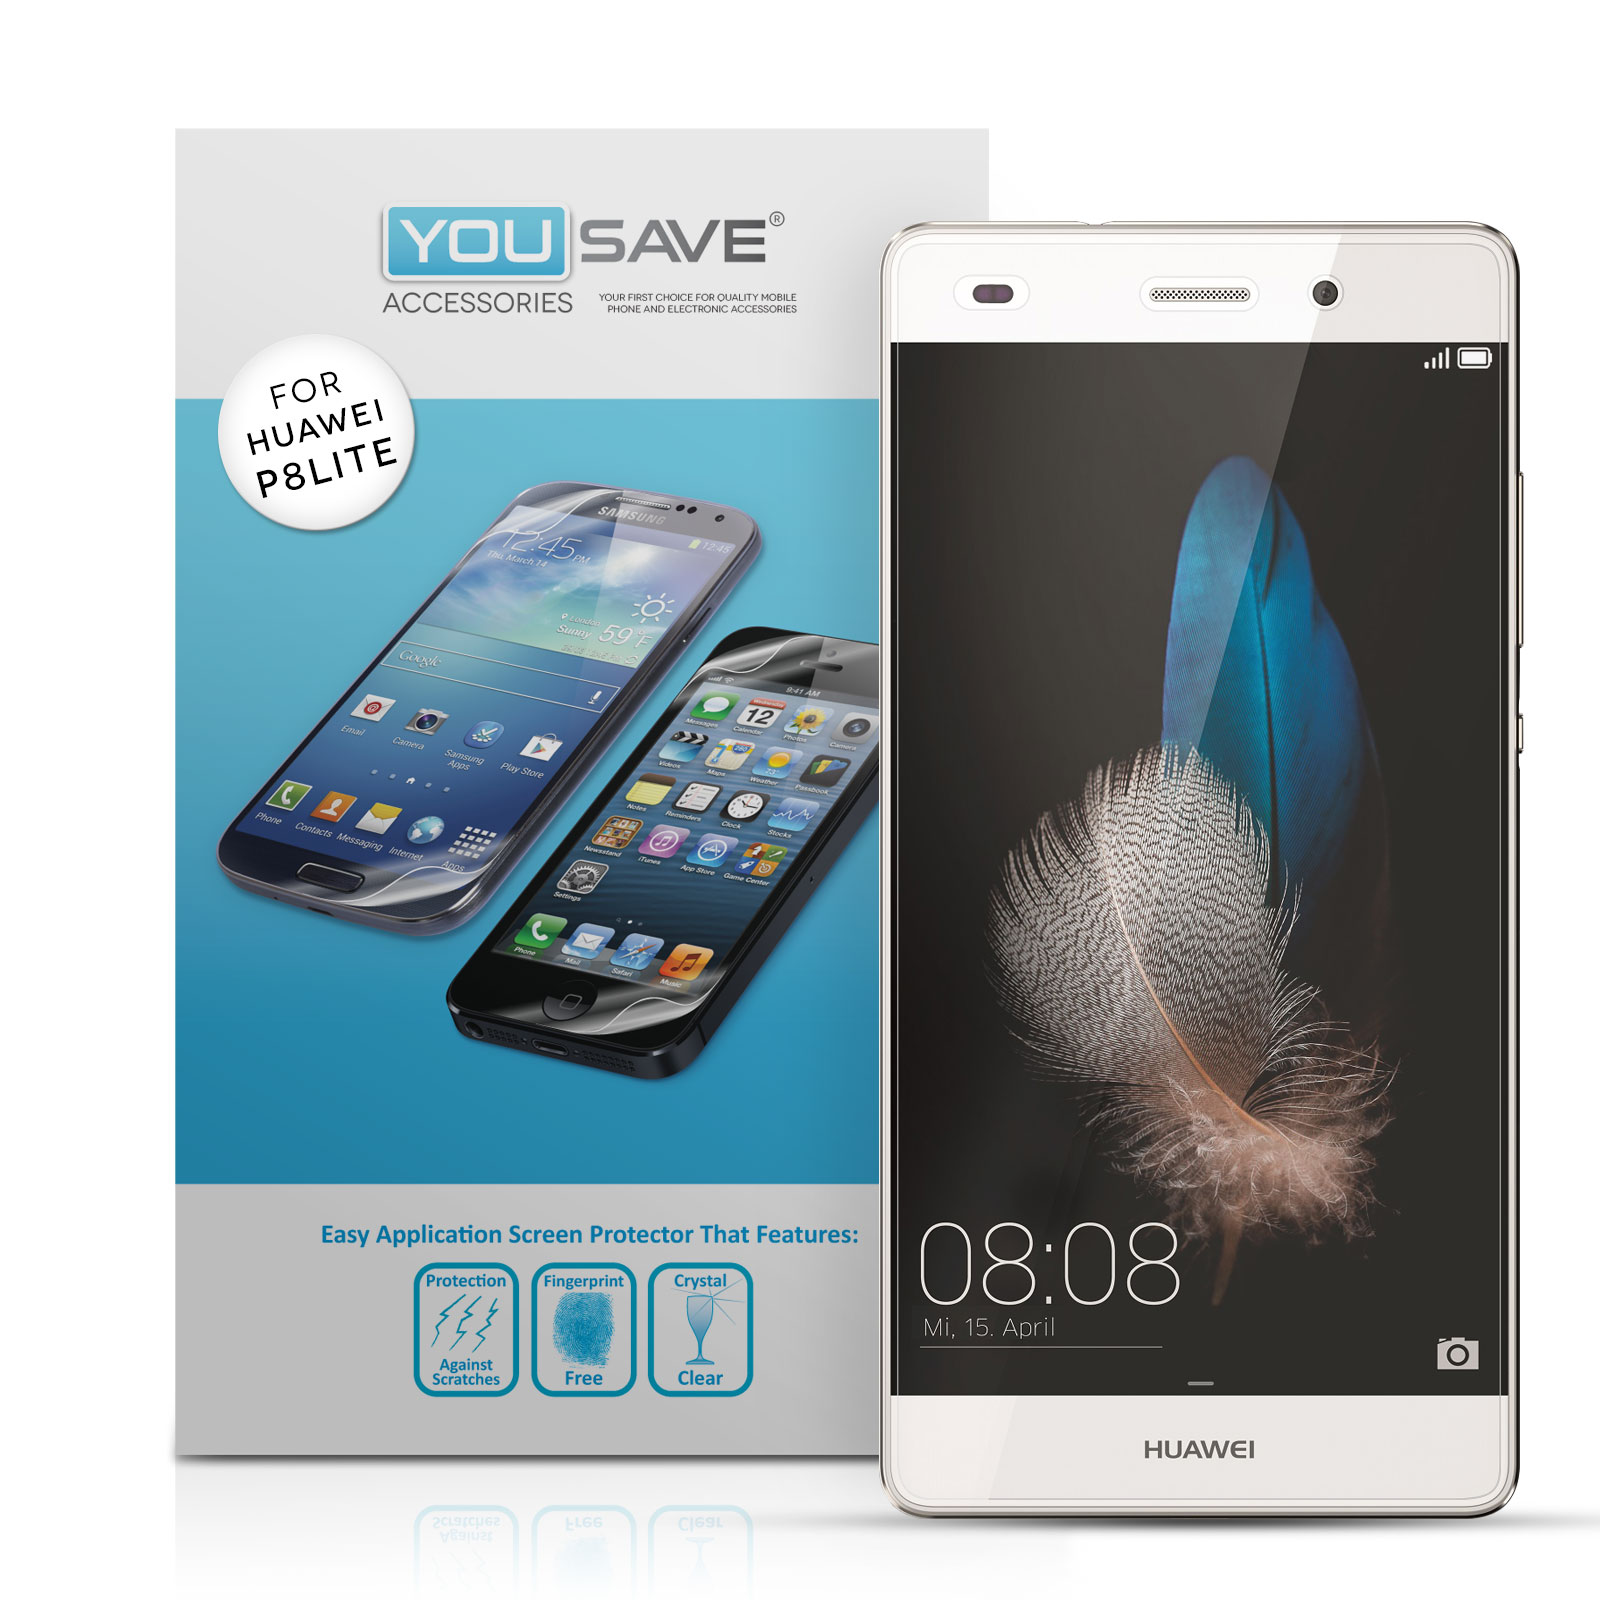 Yousave Accessories Huawei P8 Lite Screen Protectors x5